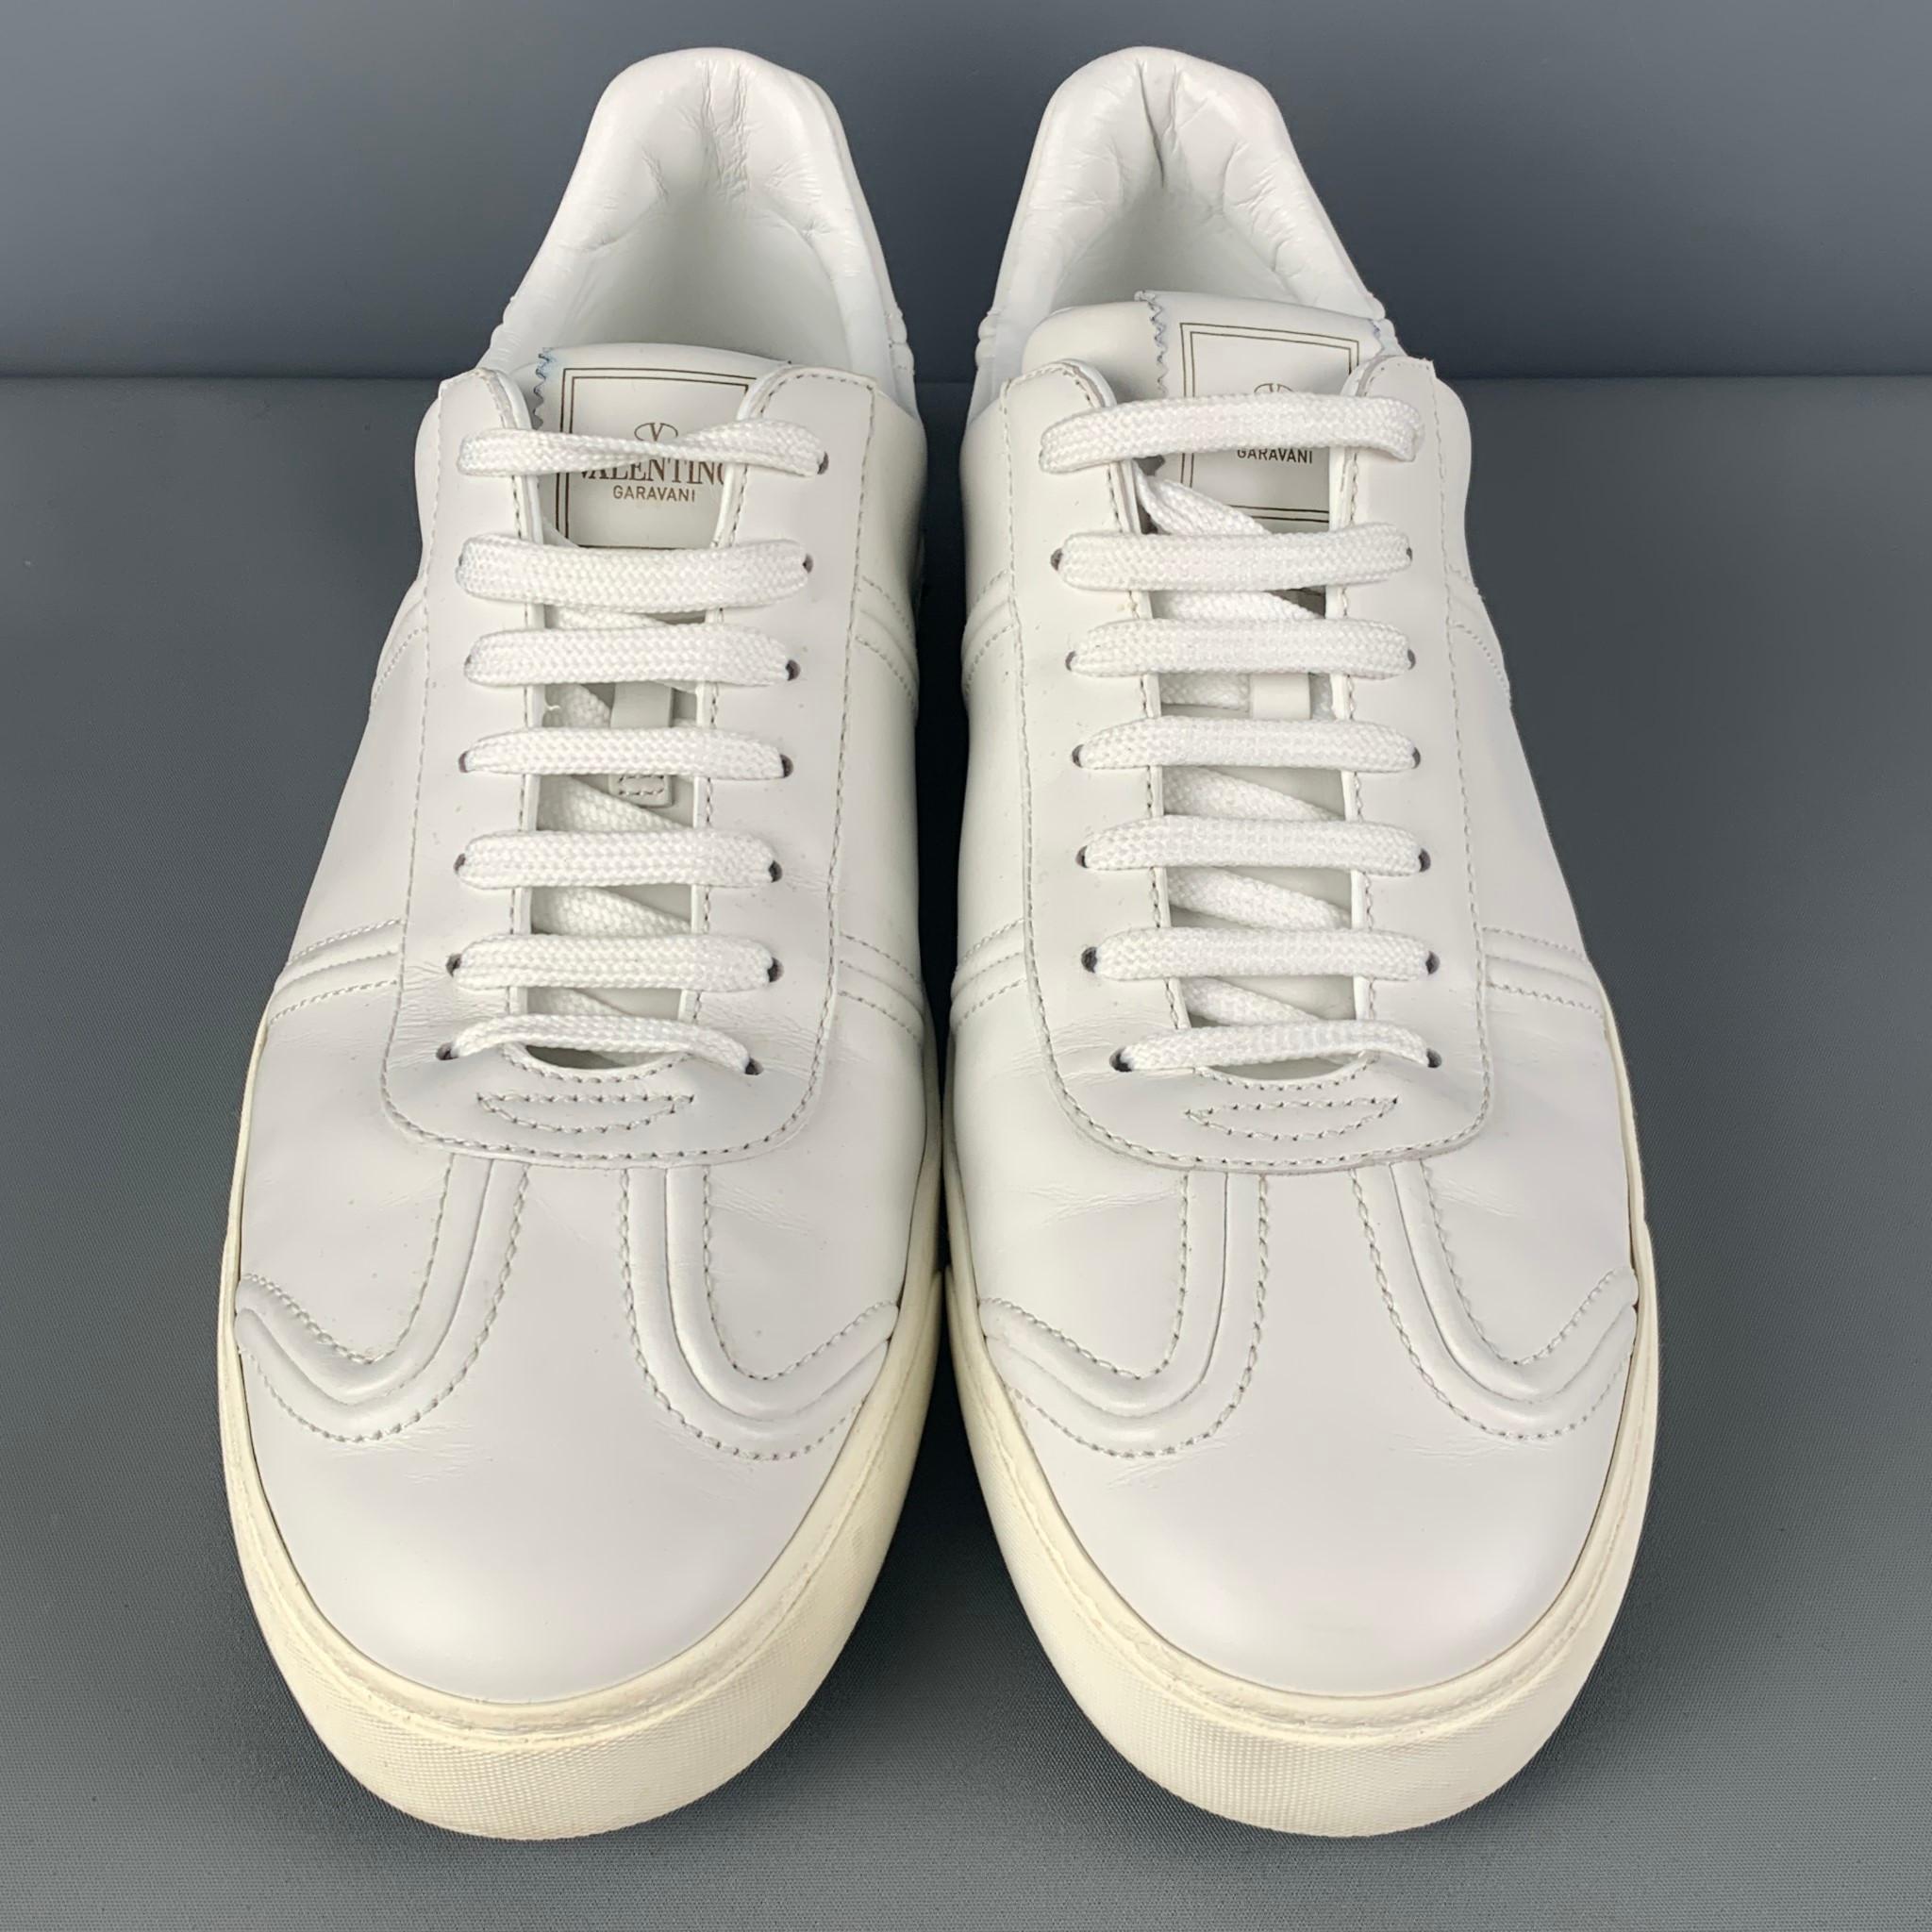 Men's VALENTINO Size 12 White Studded Leather Lace Up Sneakers